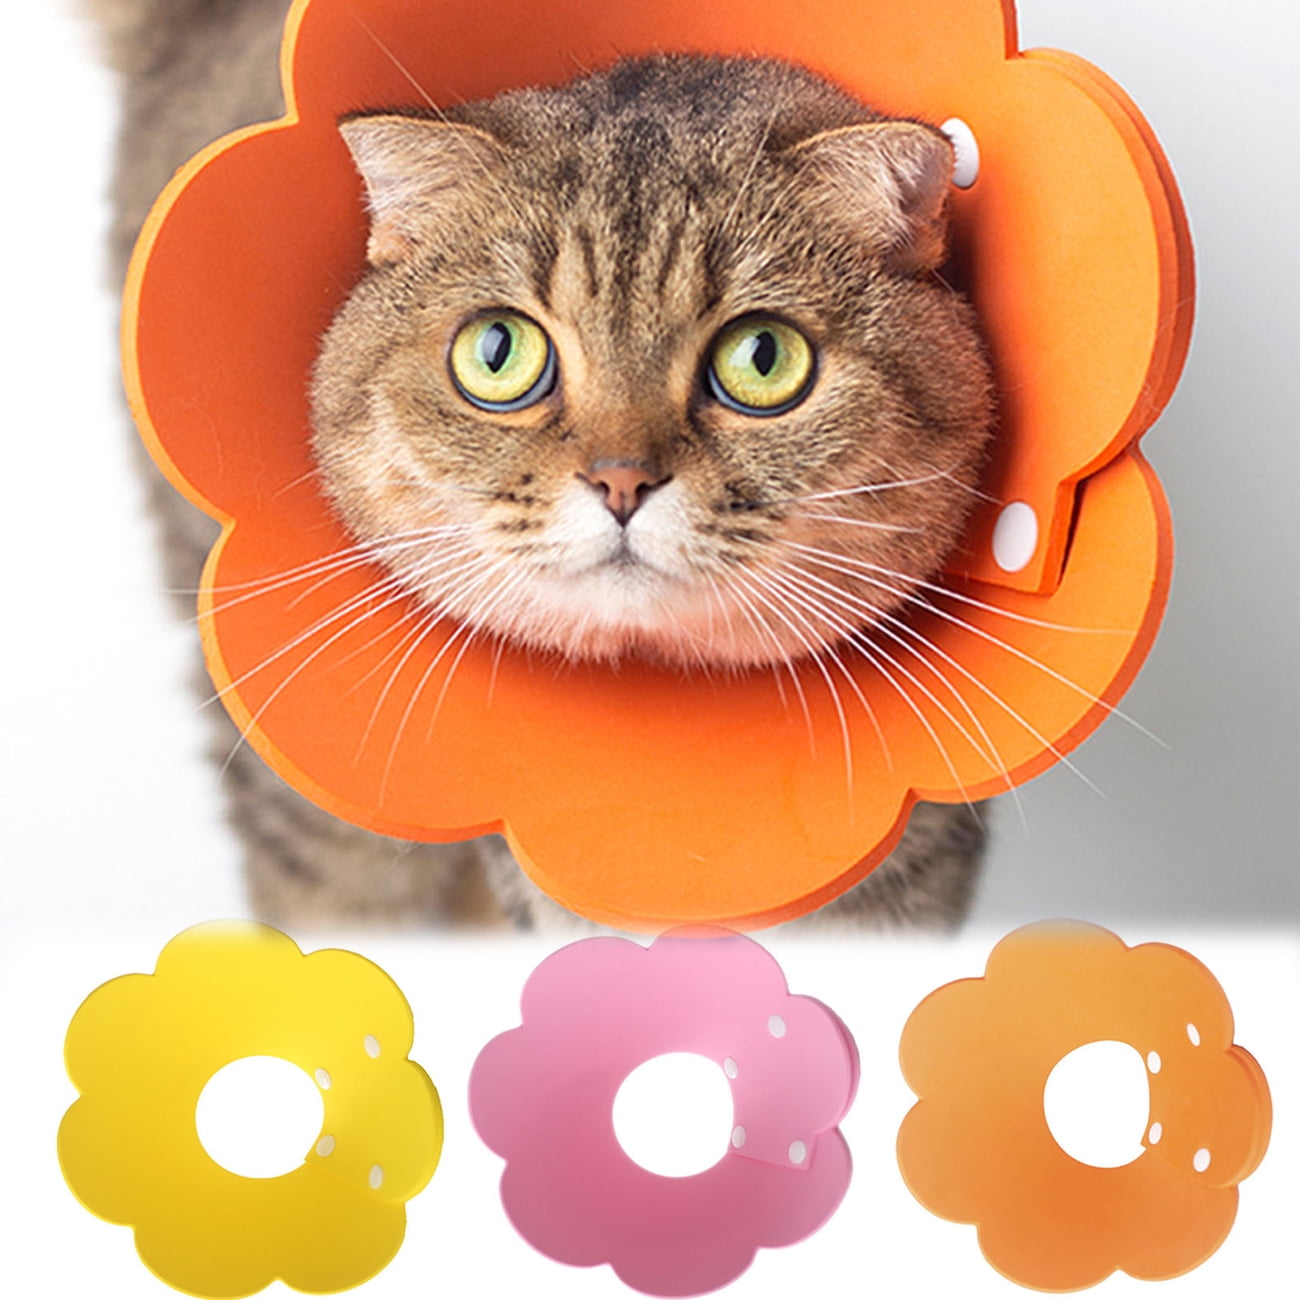 KITAINE Cat Cones After Surgery Recovery Soft-Rim Comfy Plastic Pet E-Collar for Cat Small Dog Rabbit Breathable Adjustable Cat Elizabeth Cone Collar Anti-Lick Wound Heal 